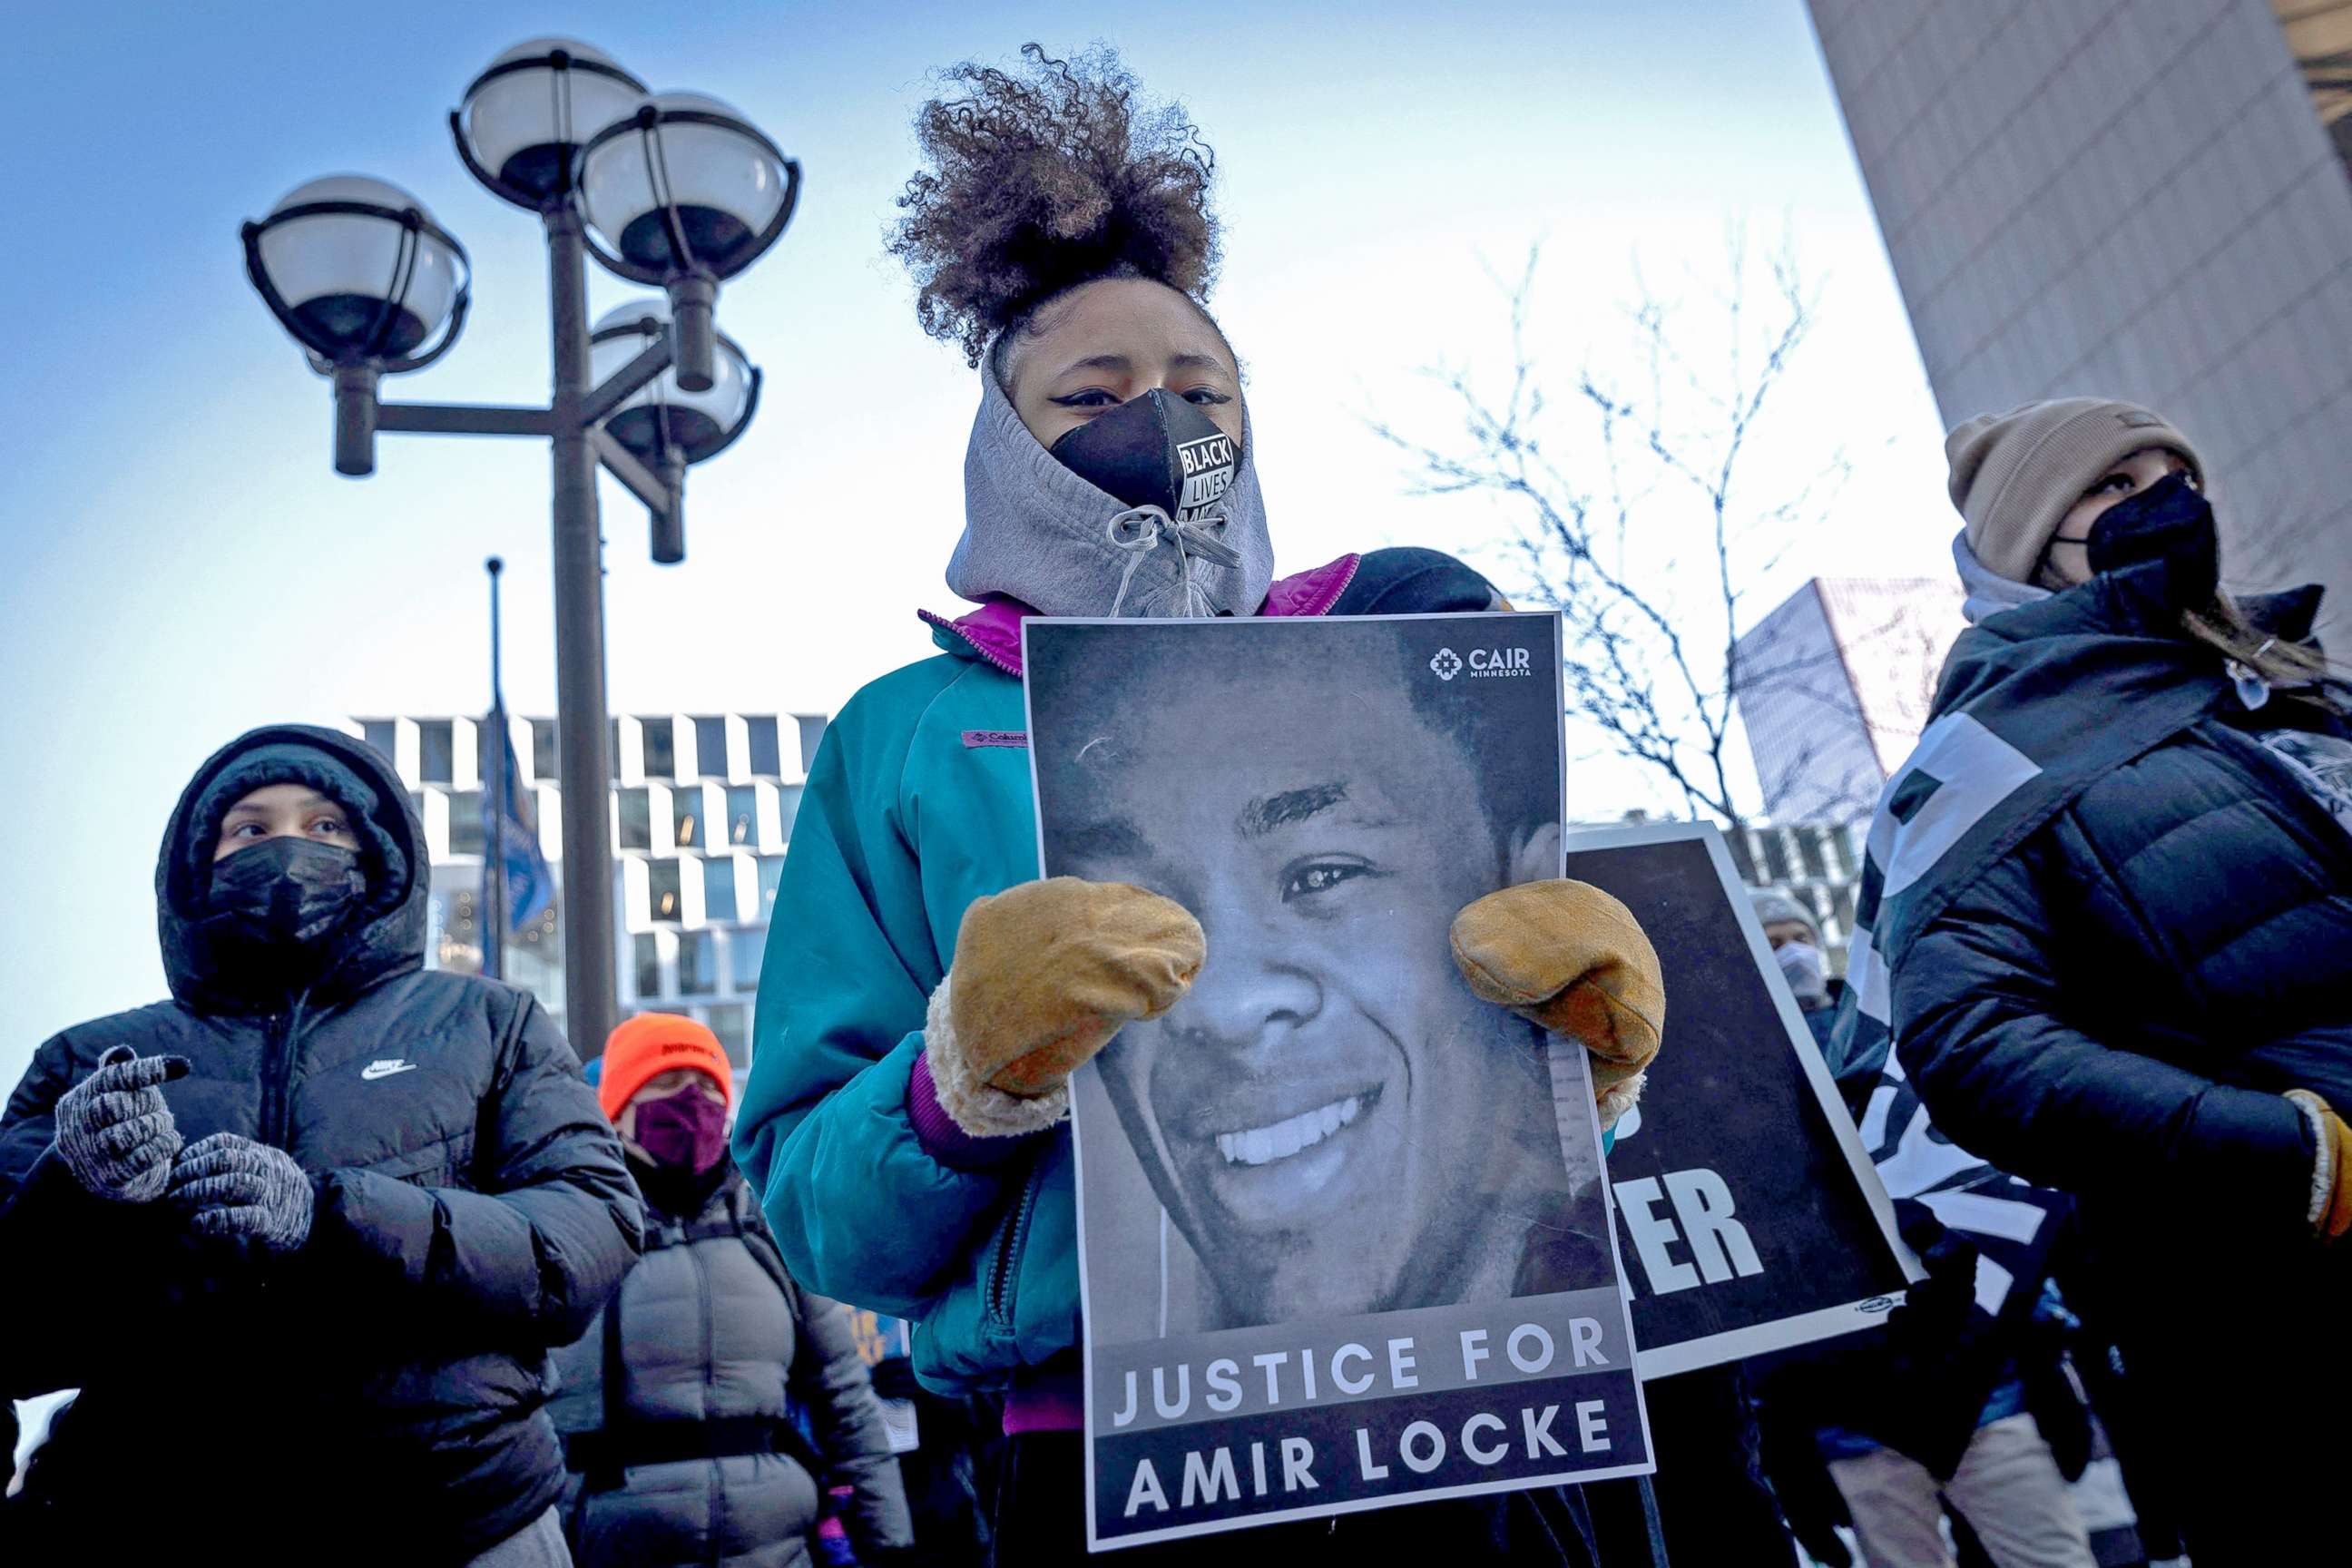 PHOTO: Demonstrators hold placards during a rally in protest of the killing of Amir Locke, outside the Hennepin County Government Center in Minneapolis, Minnesota on February 5, 2022.